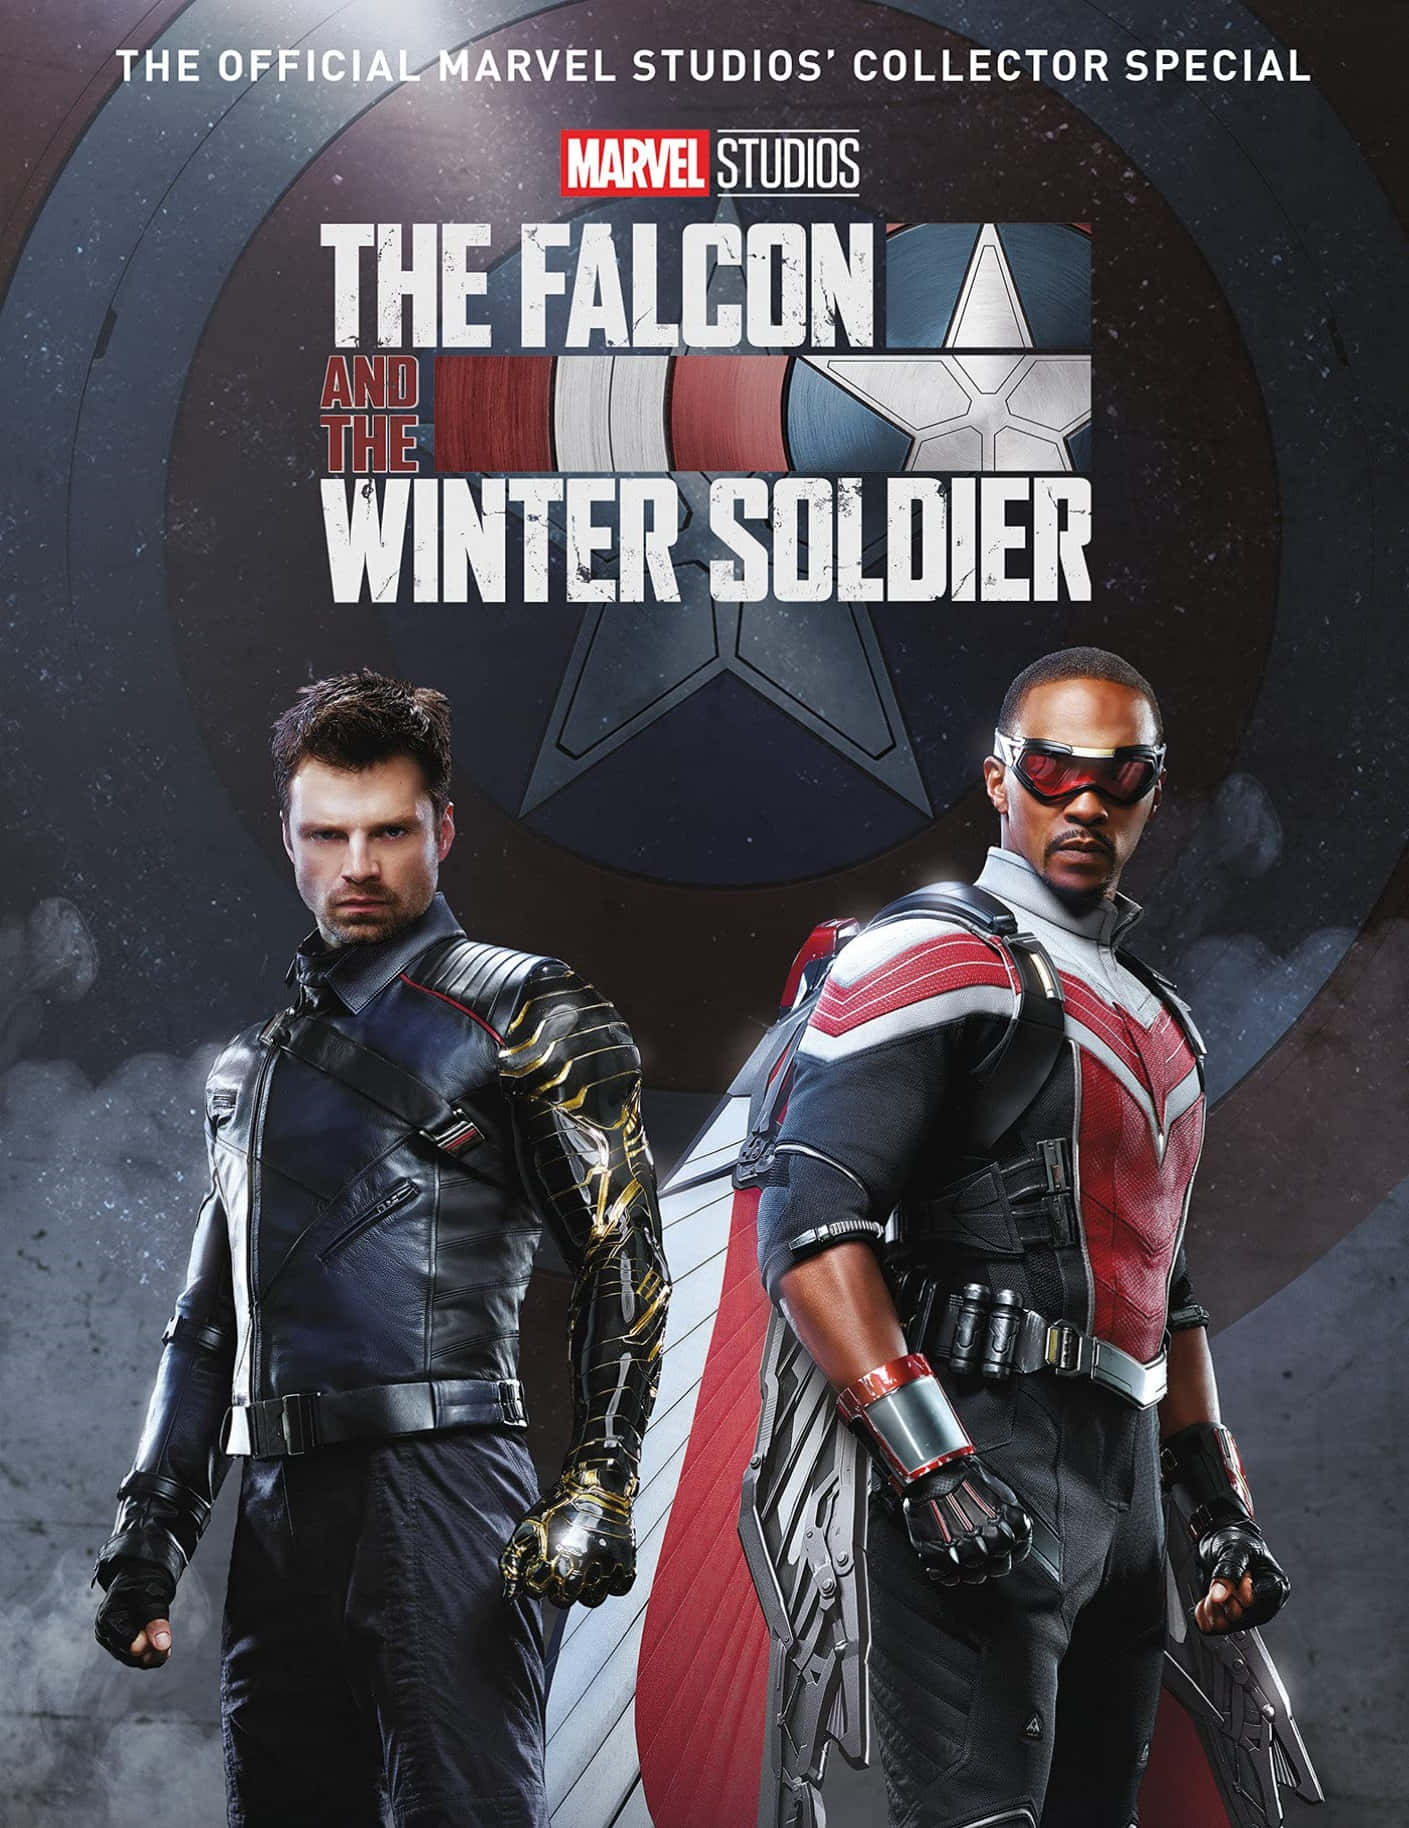 Diehelden Des Films The Falcon And The Winter Soldier Wallpaper